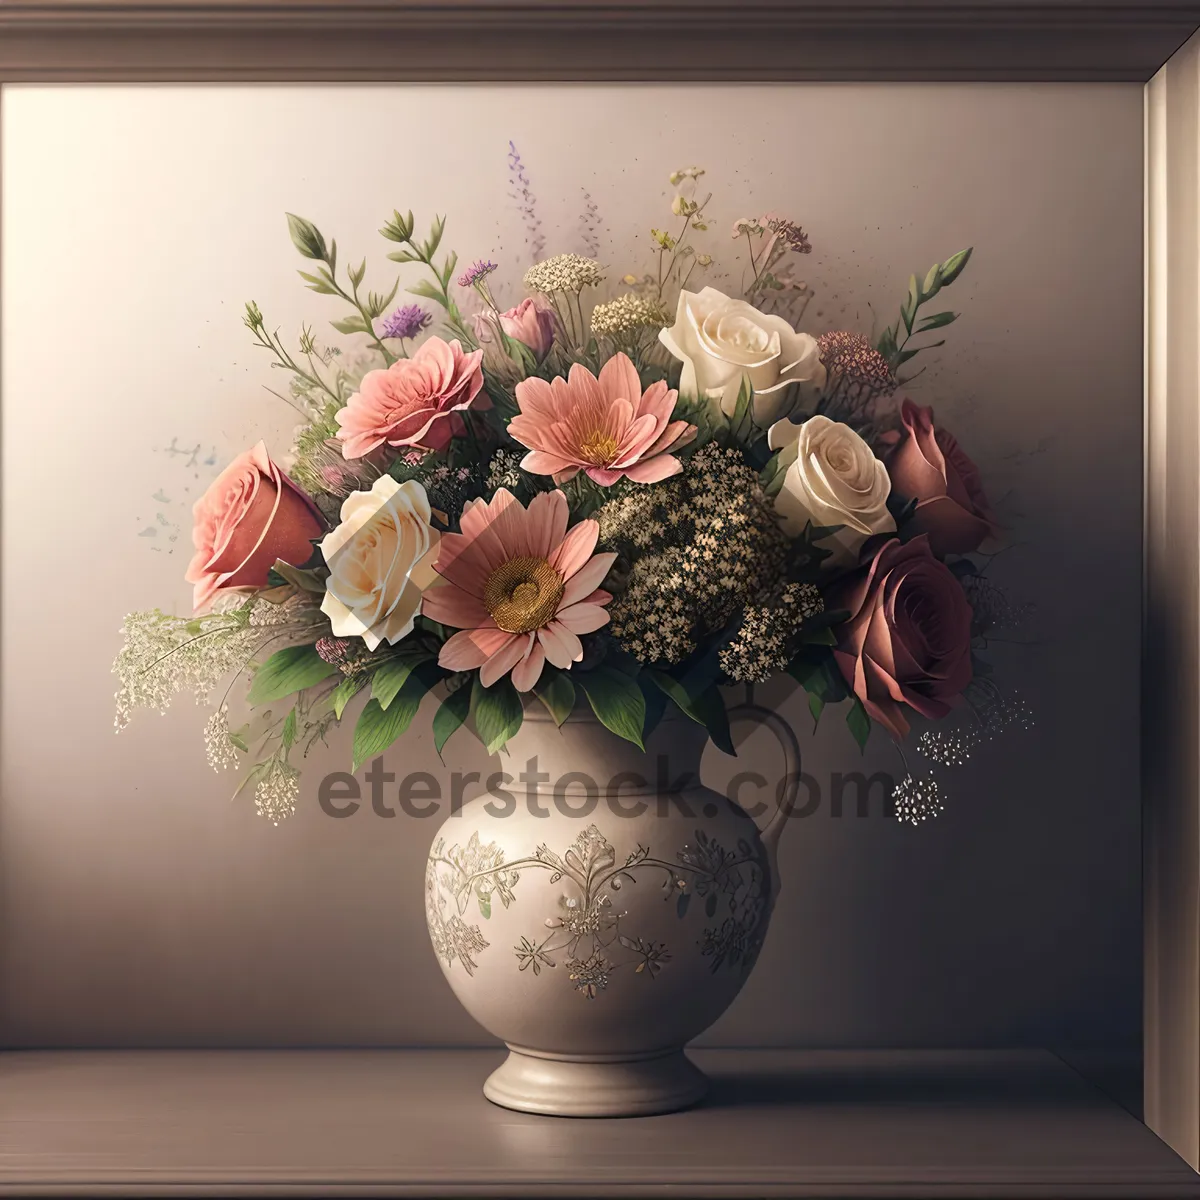 Picture of Elegant China Vase with Beautiful Floral Arrangement